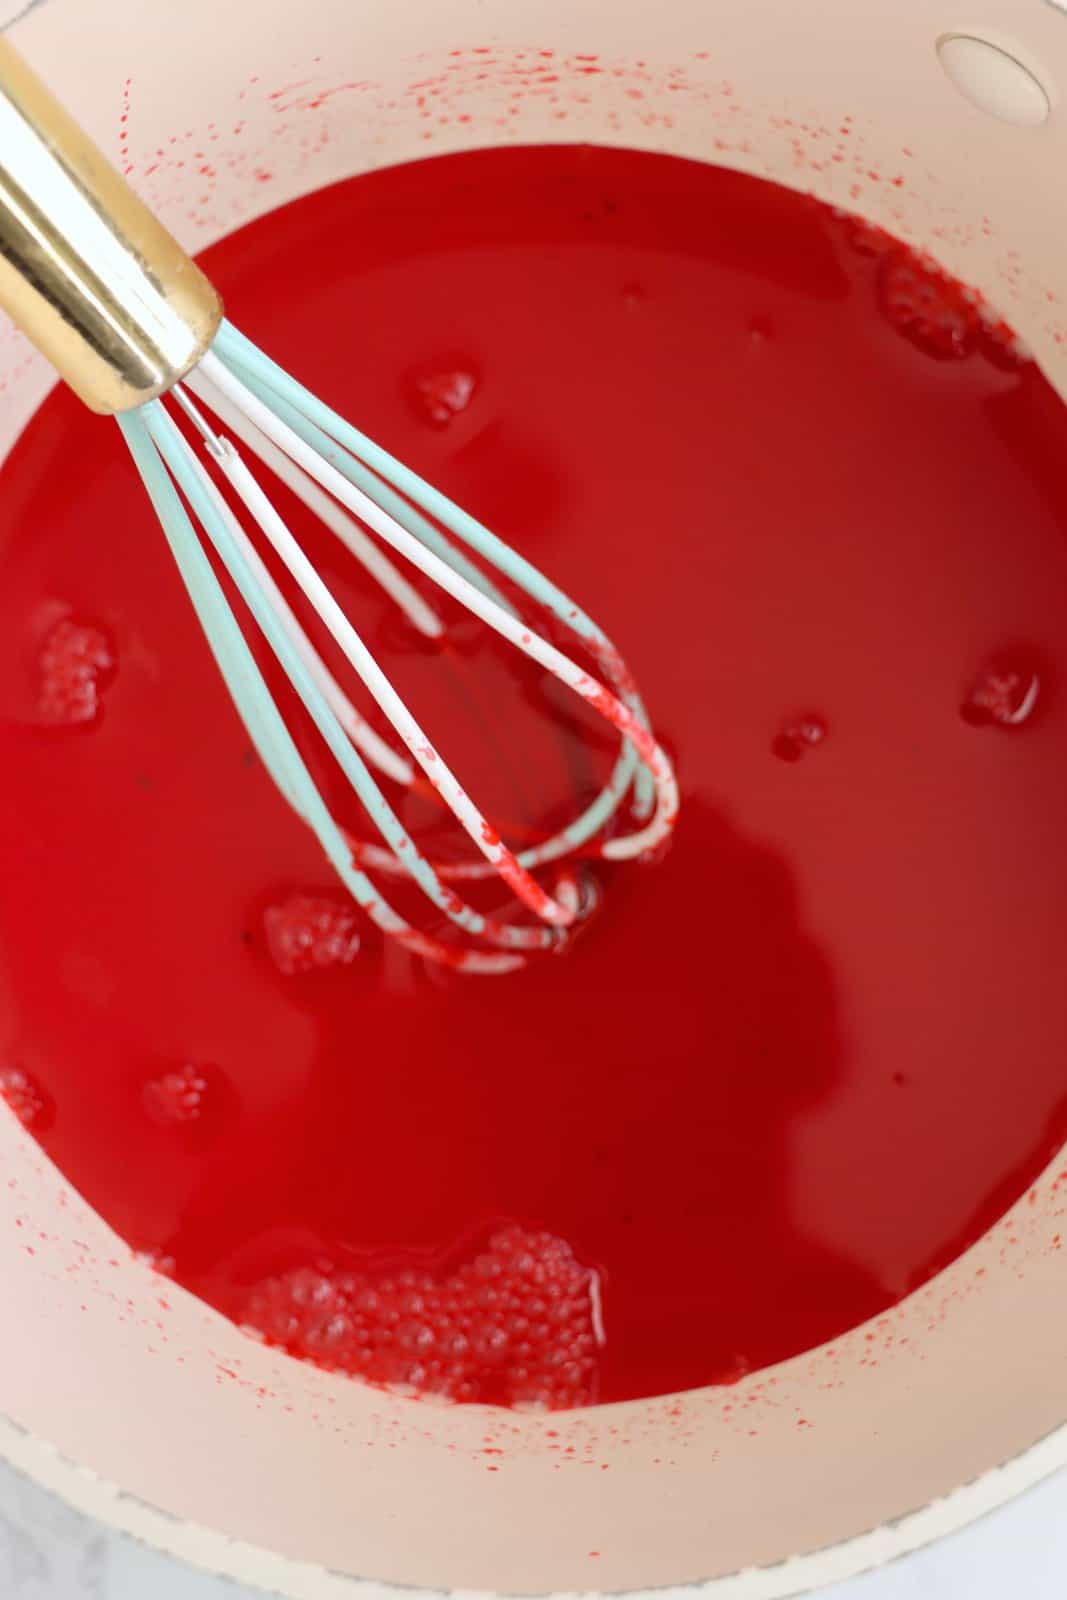 Cherry jello mixture in a bowl with a whisk,